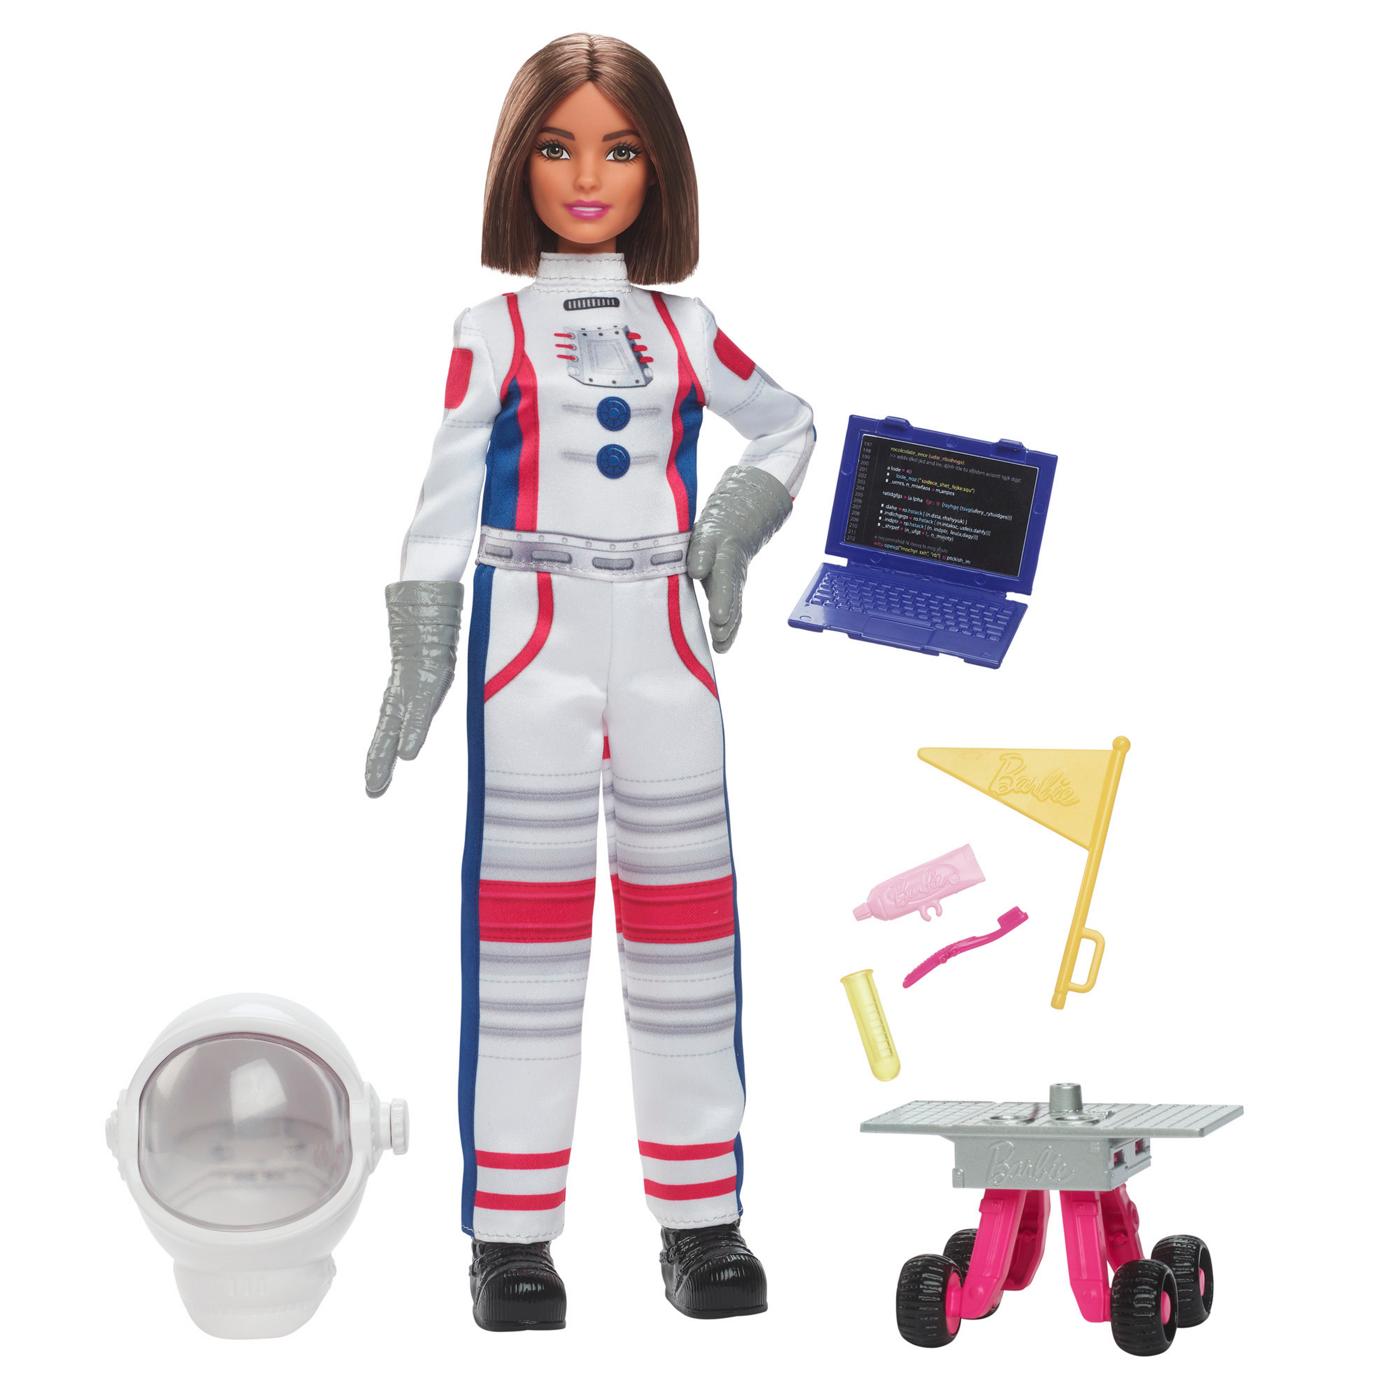 Barbie 65th Anniversary Careers Astronaut Doll Playset; image 3 of 3